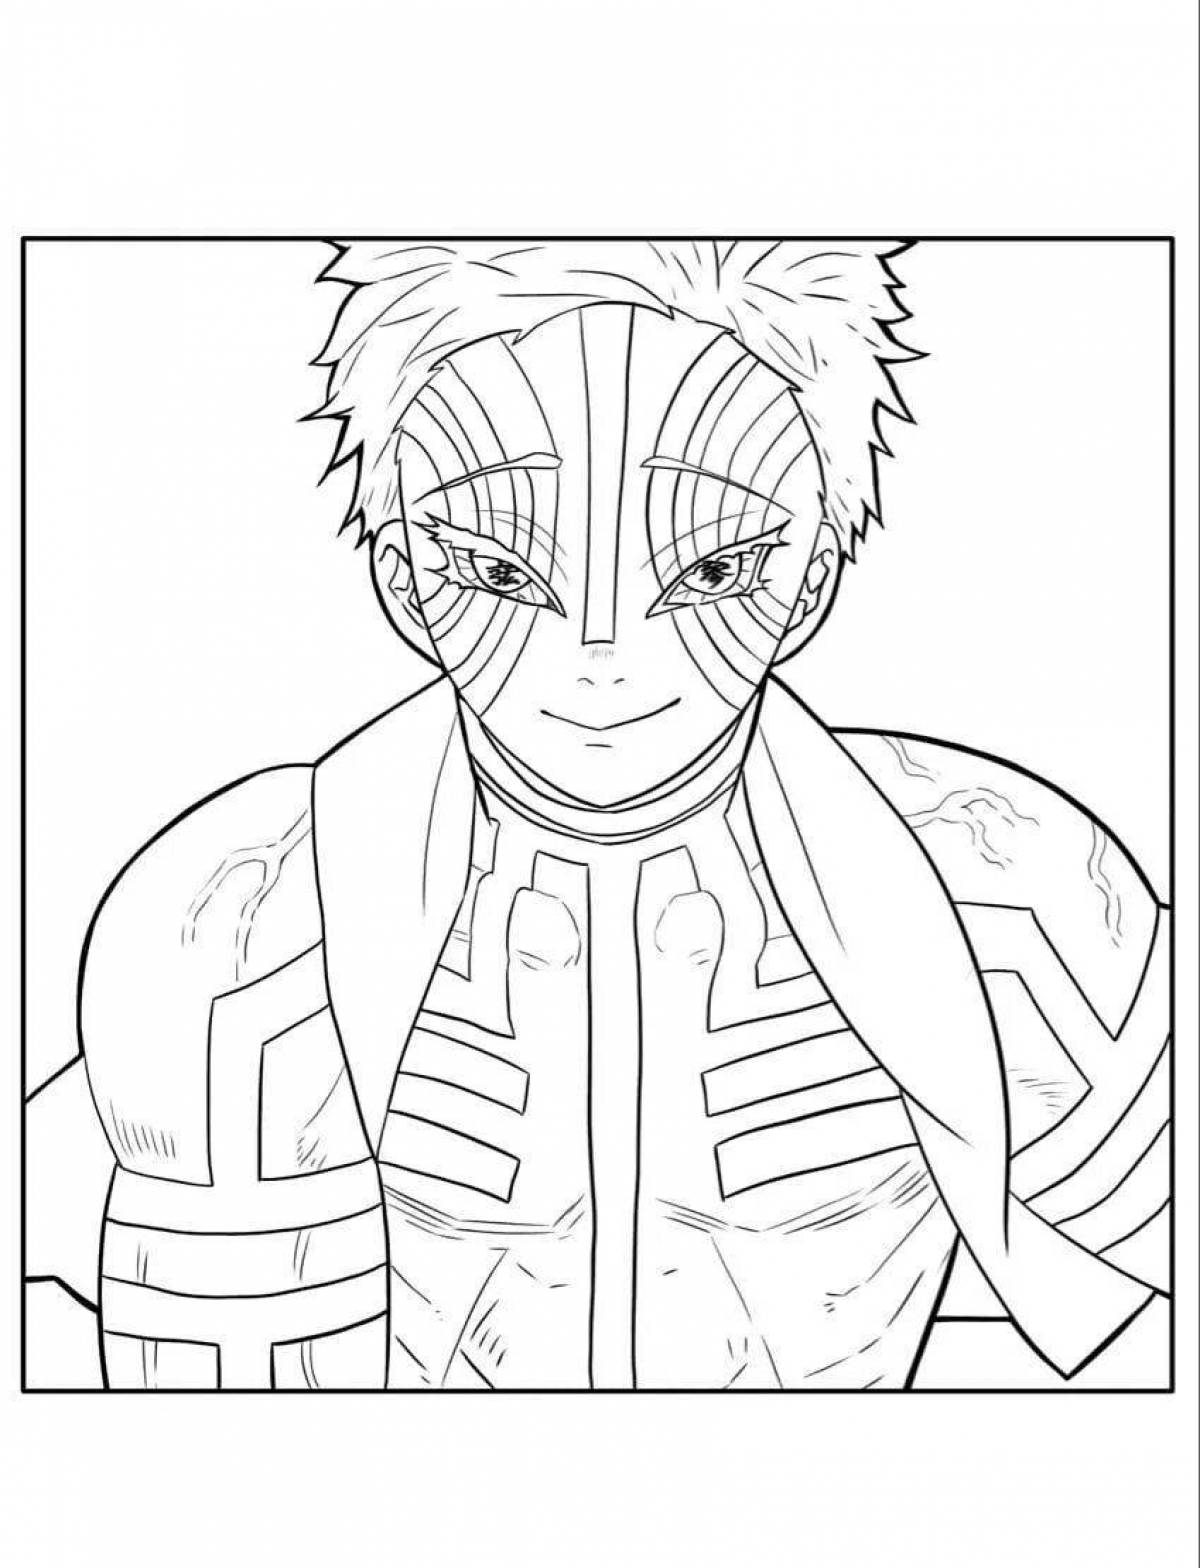 Innovative cutting blade coloring page